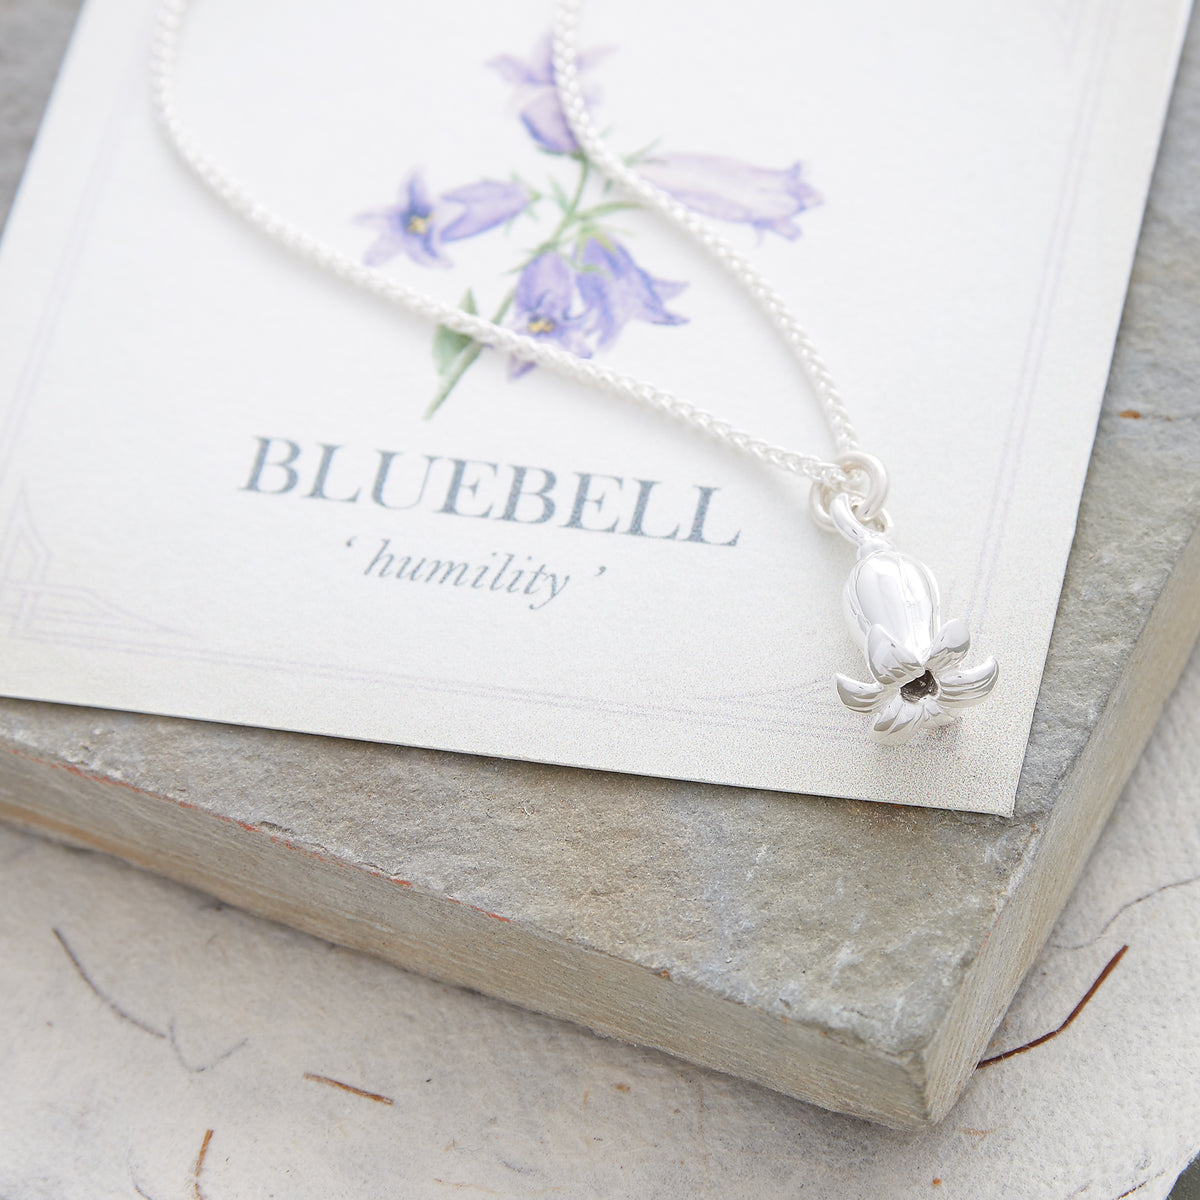 Exquisite Scarlett Jewellery Silver Bluebell Charm showcased on Finished Necklace